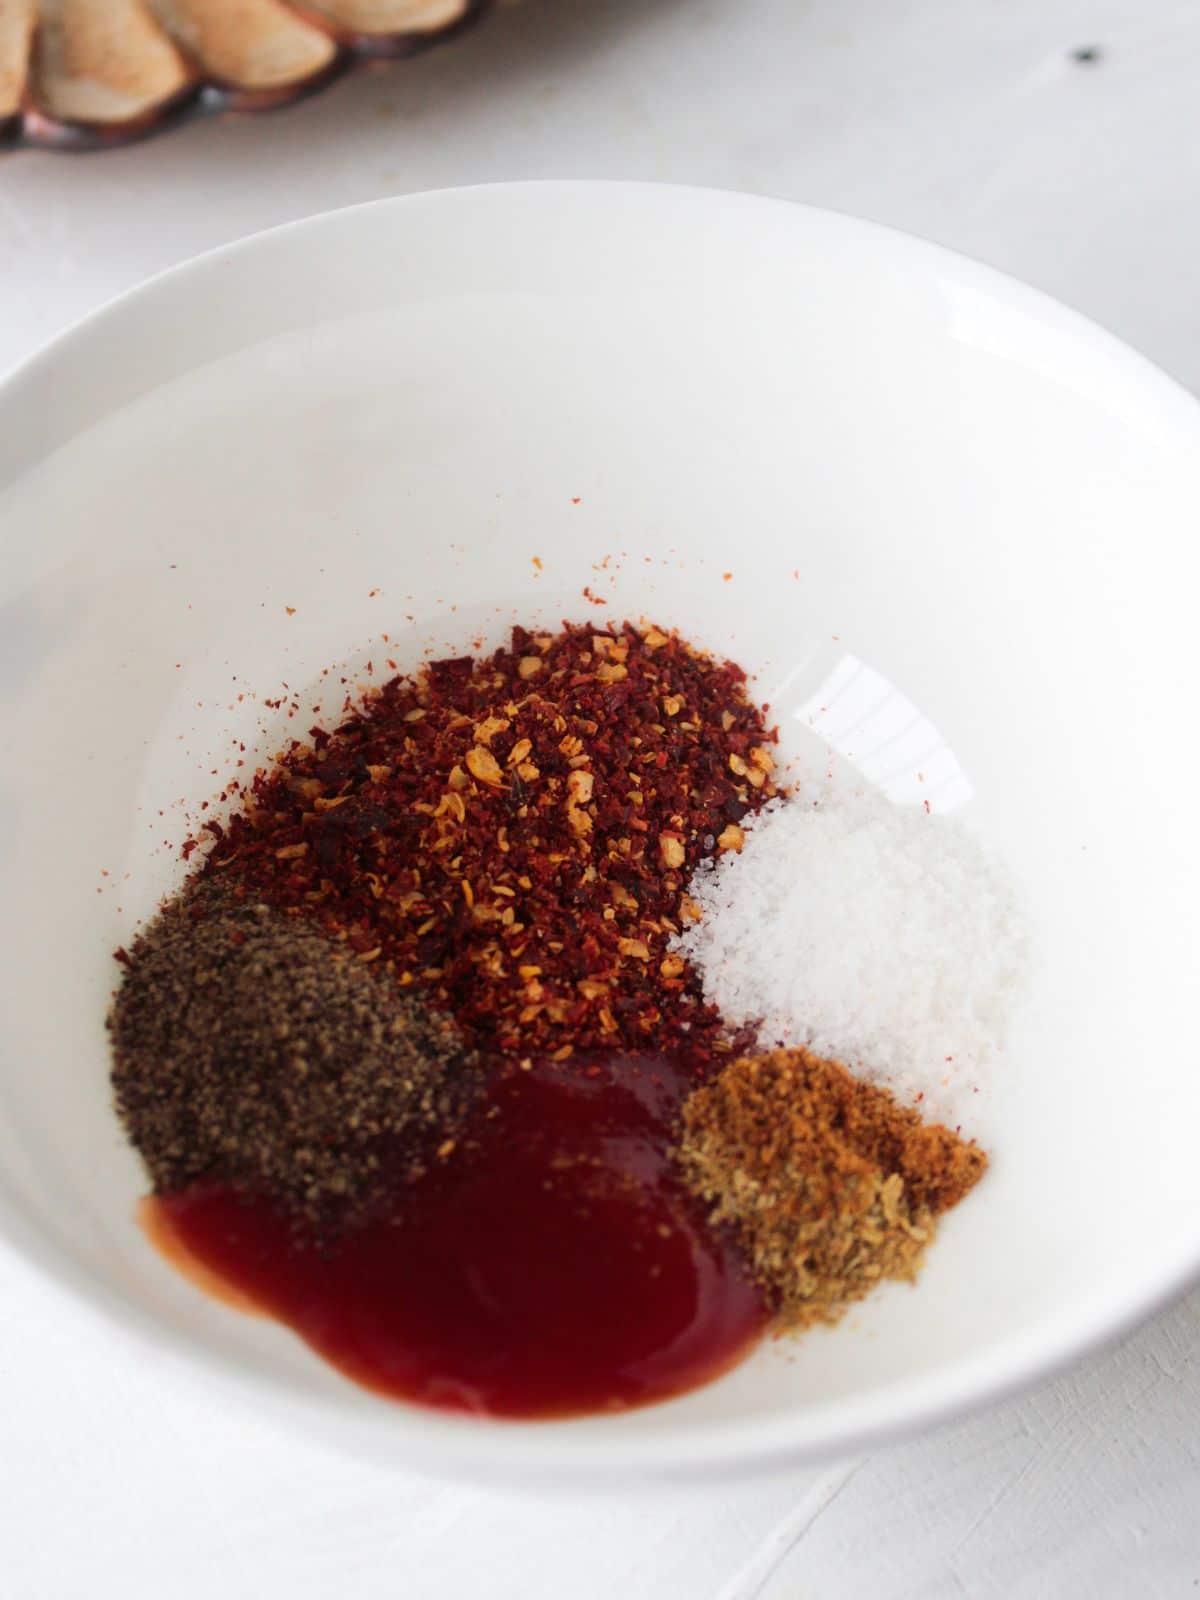 White bowl with 4 spices and a dark red liquid for marinating chicken